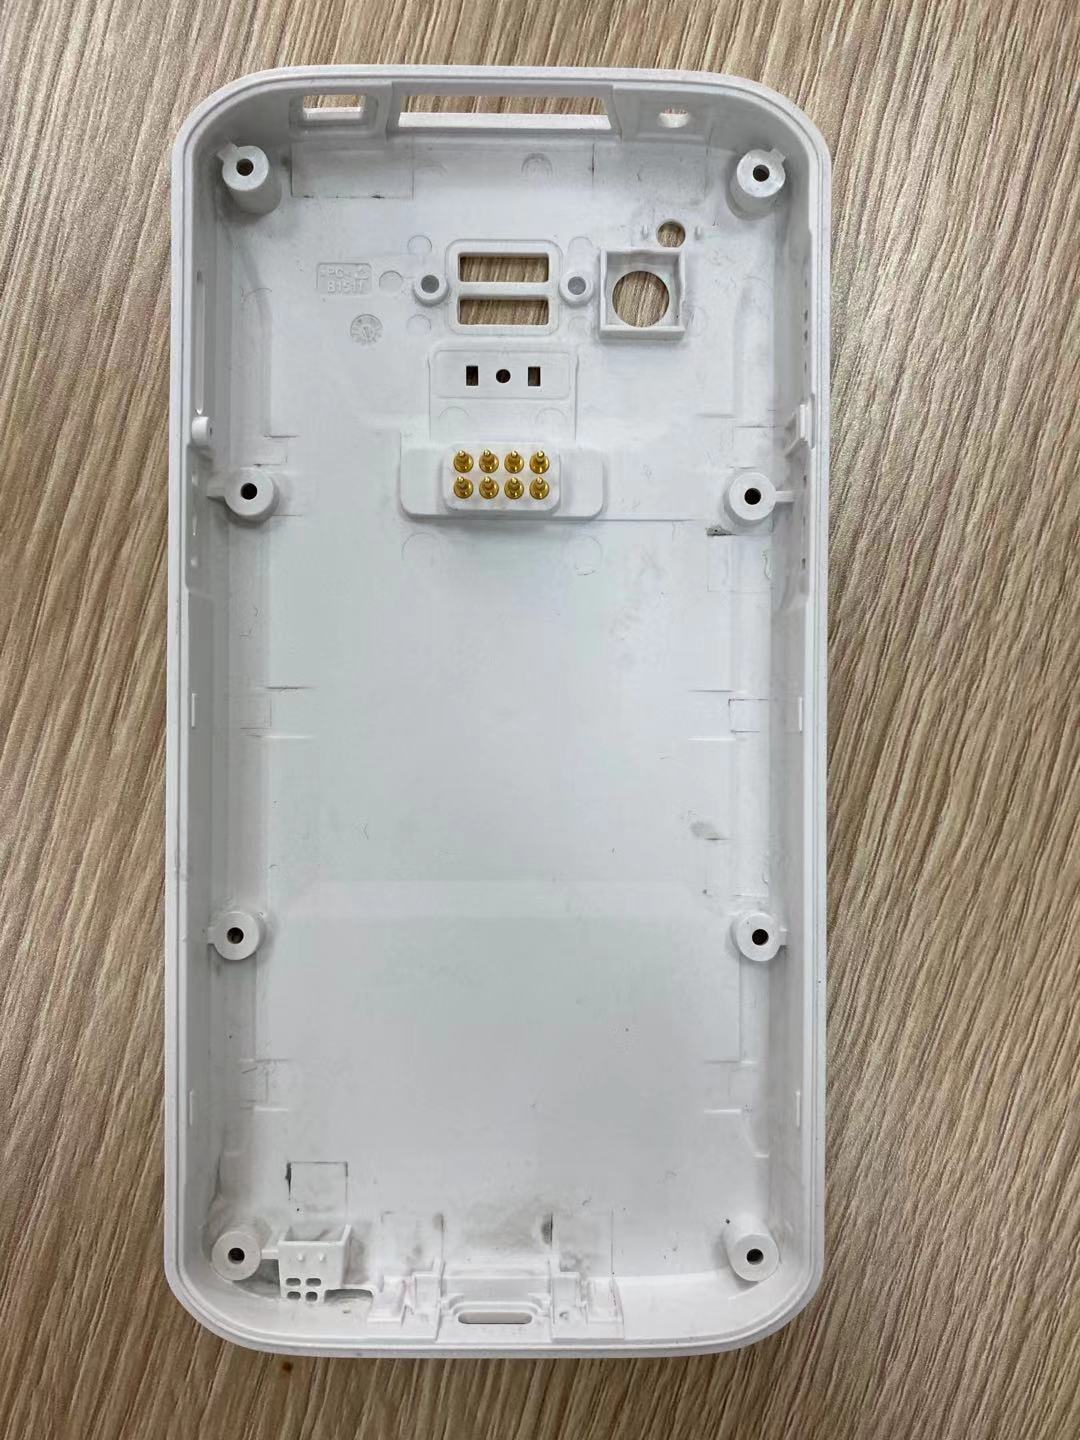 Pos machine Pogo pin connector for your design